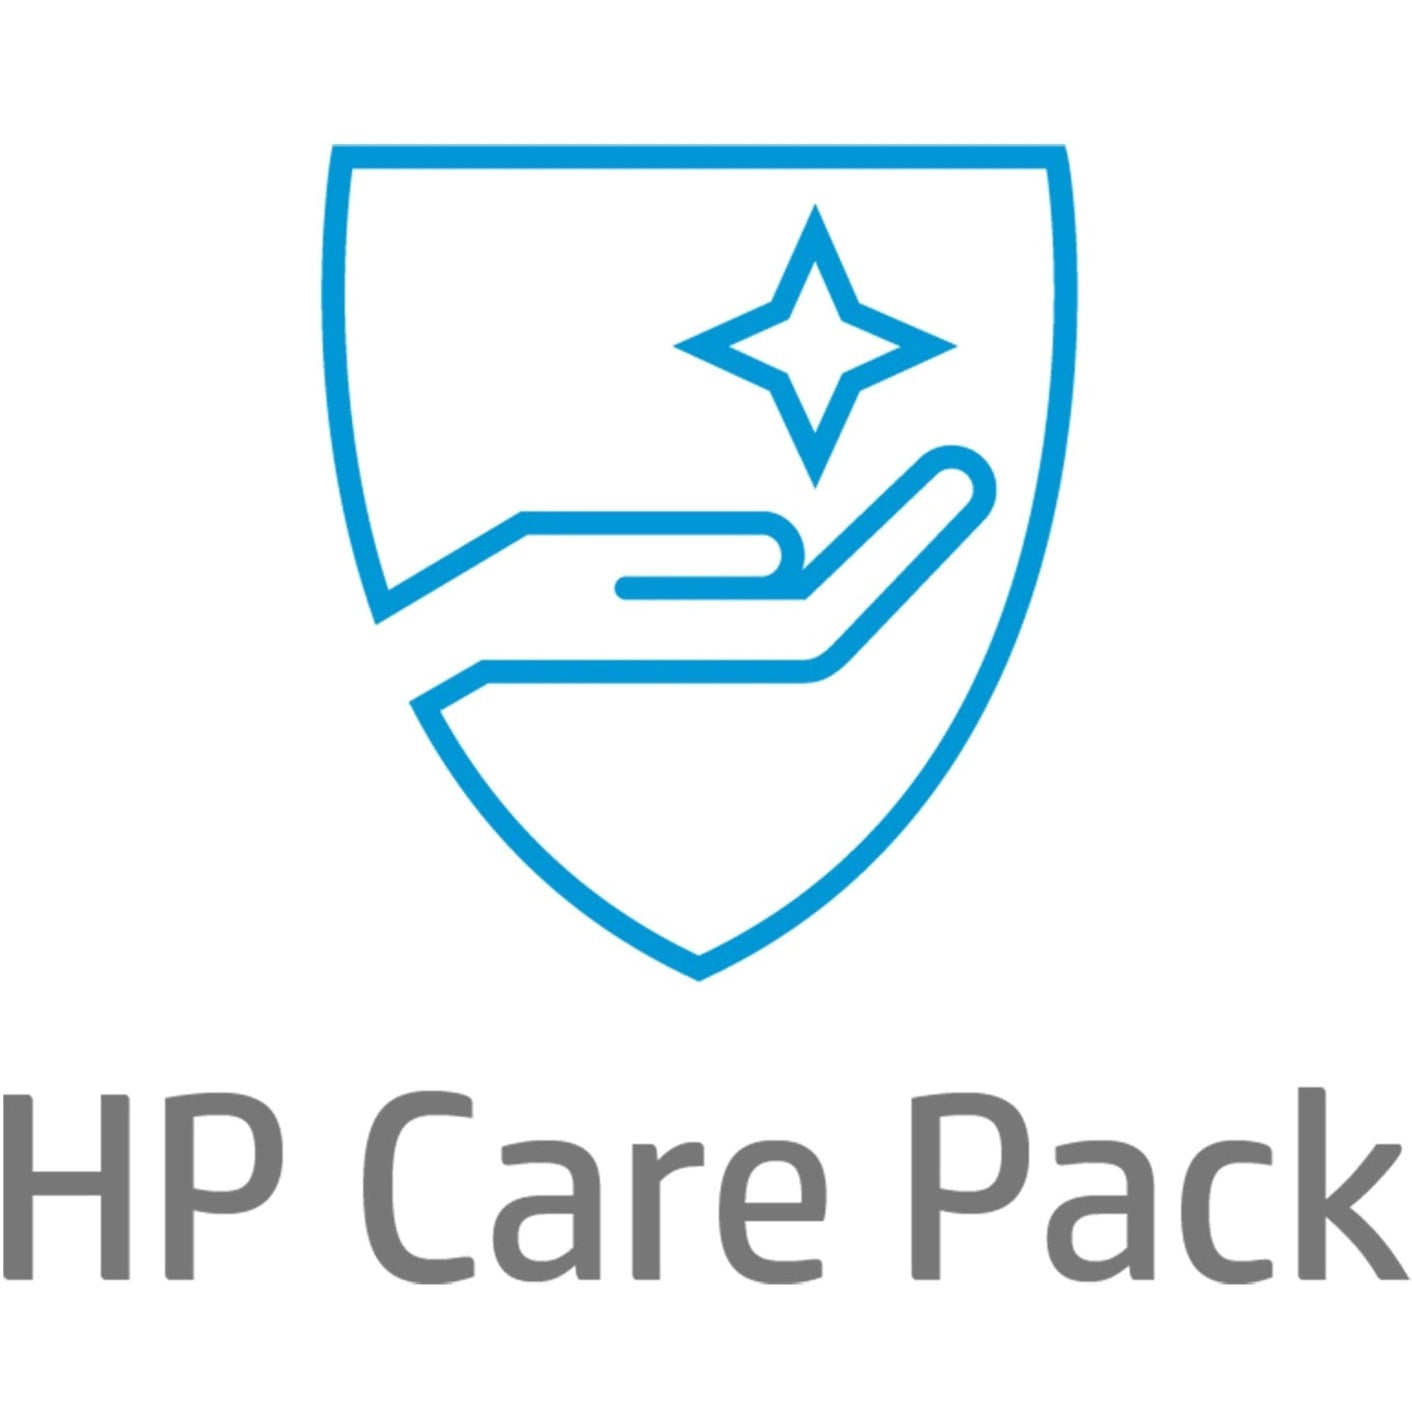 HP Care Pack - Extended Service - 4 Year - Service (U9CQ1E)